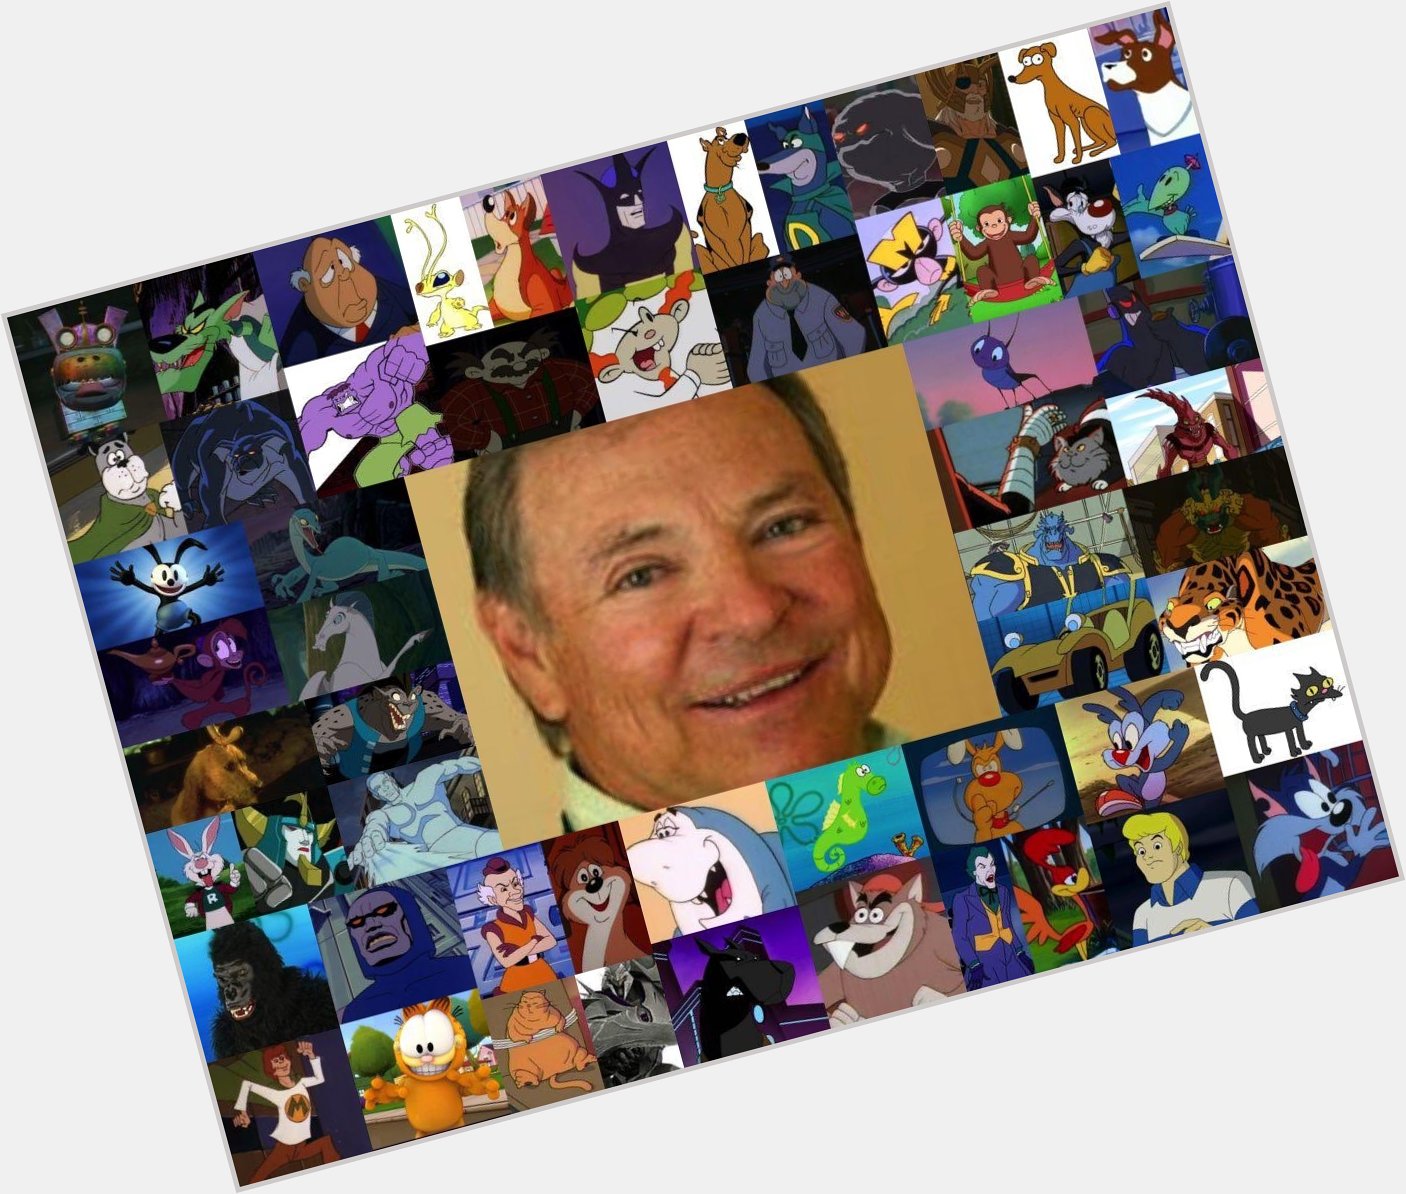 Happy 74th Birthday to actor and voice actor, Frank Welker! 